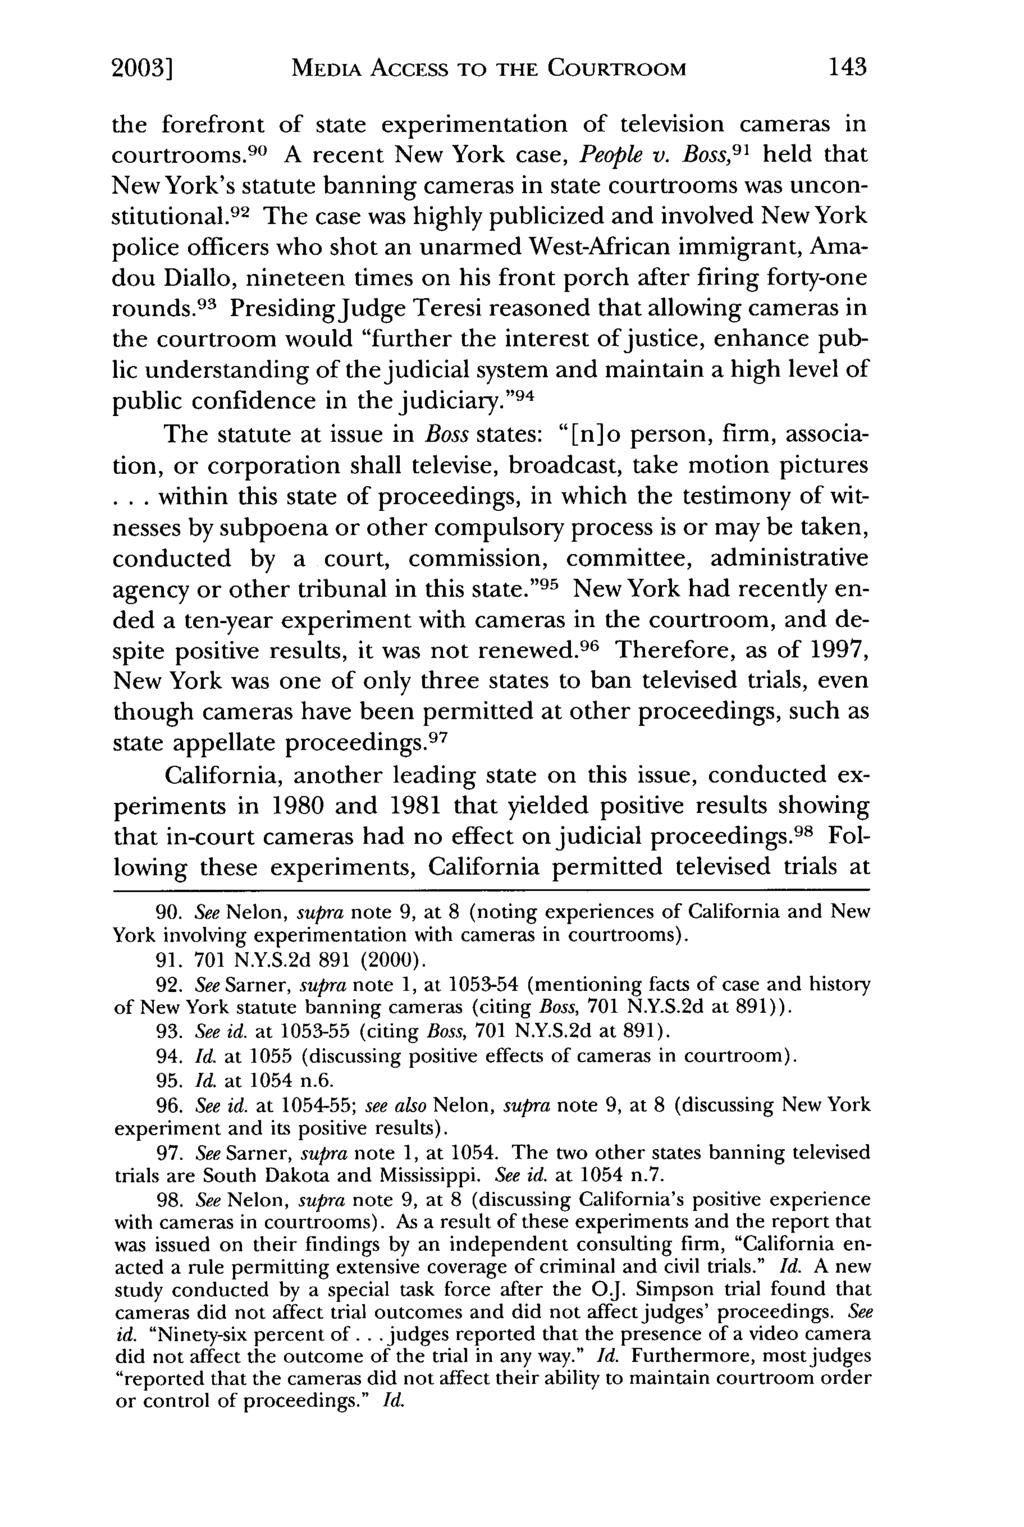 2003] Johnson: The Entertainment Value of a Trial: How Media Access to the Court MEDIA ACCESS TO THE COURTROOM the forefront of state experimentation of television cameras in courtrooms.